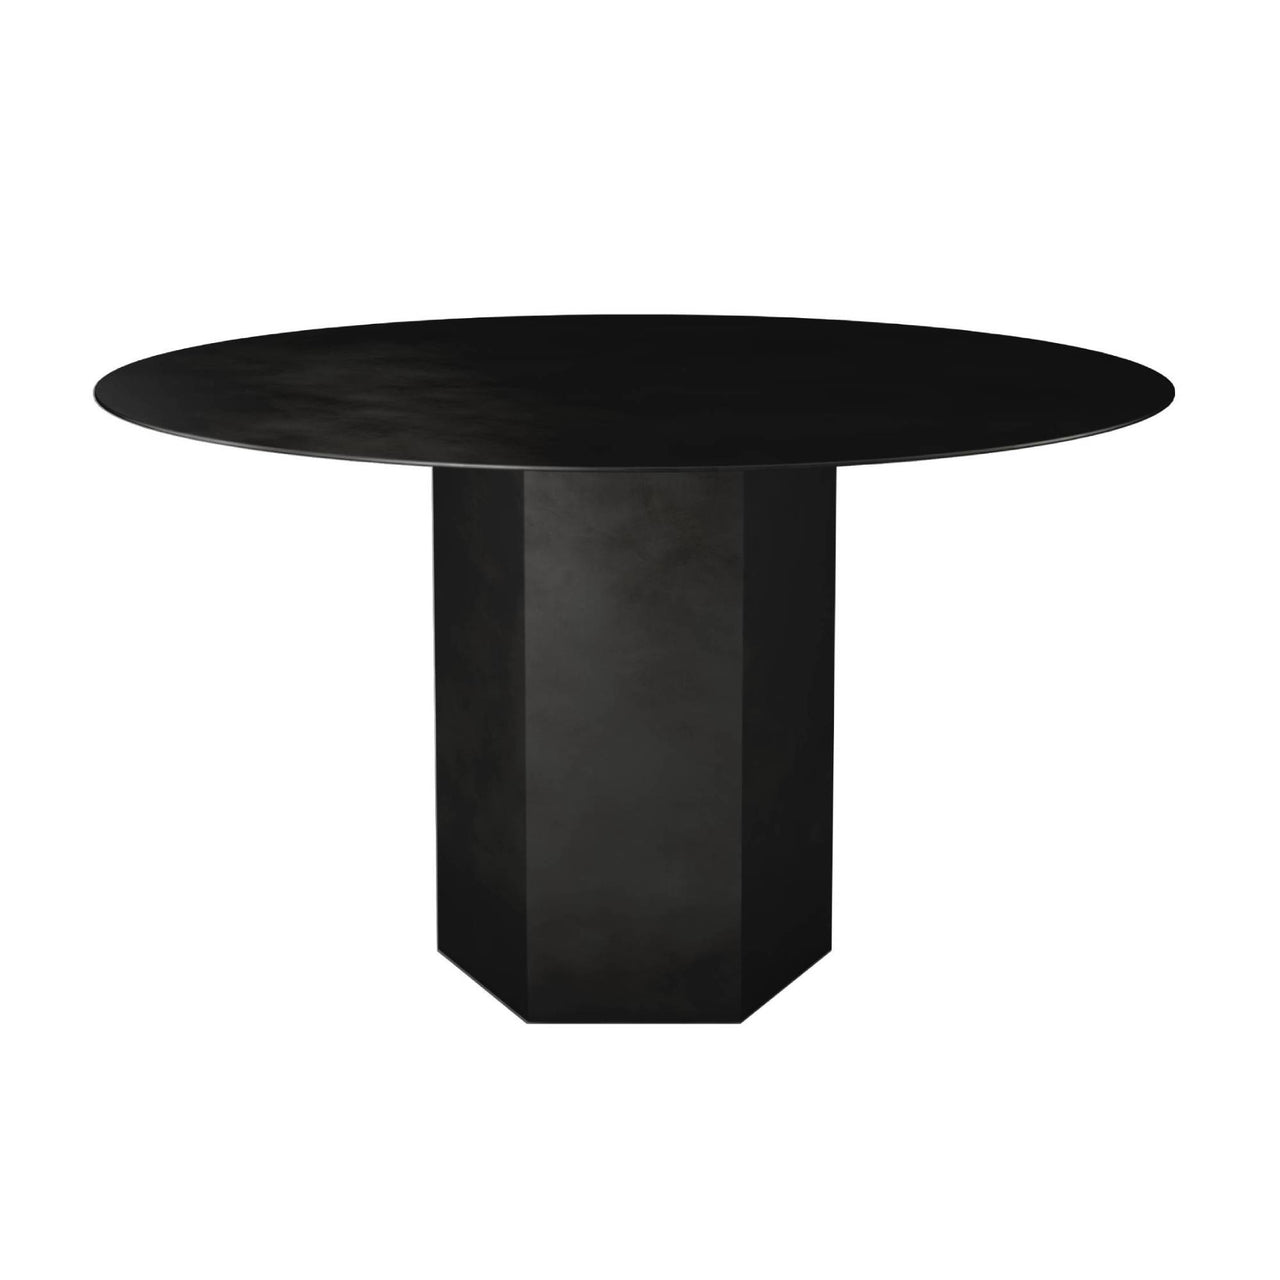 Epic Round Dining Table: Steel + Midnight Black